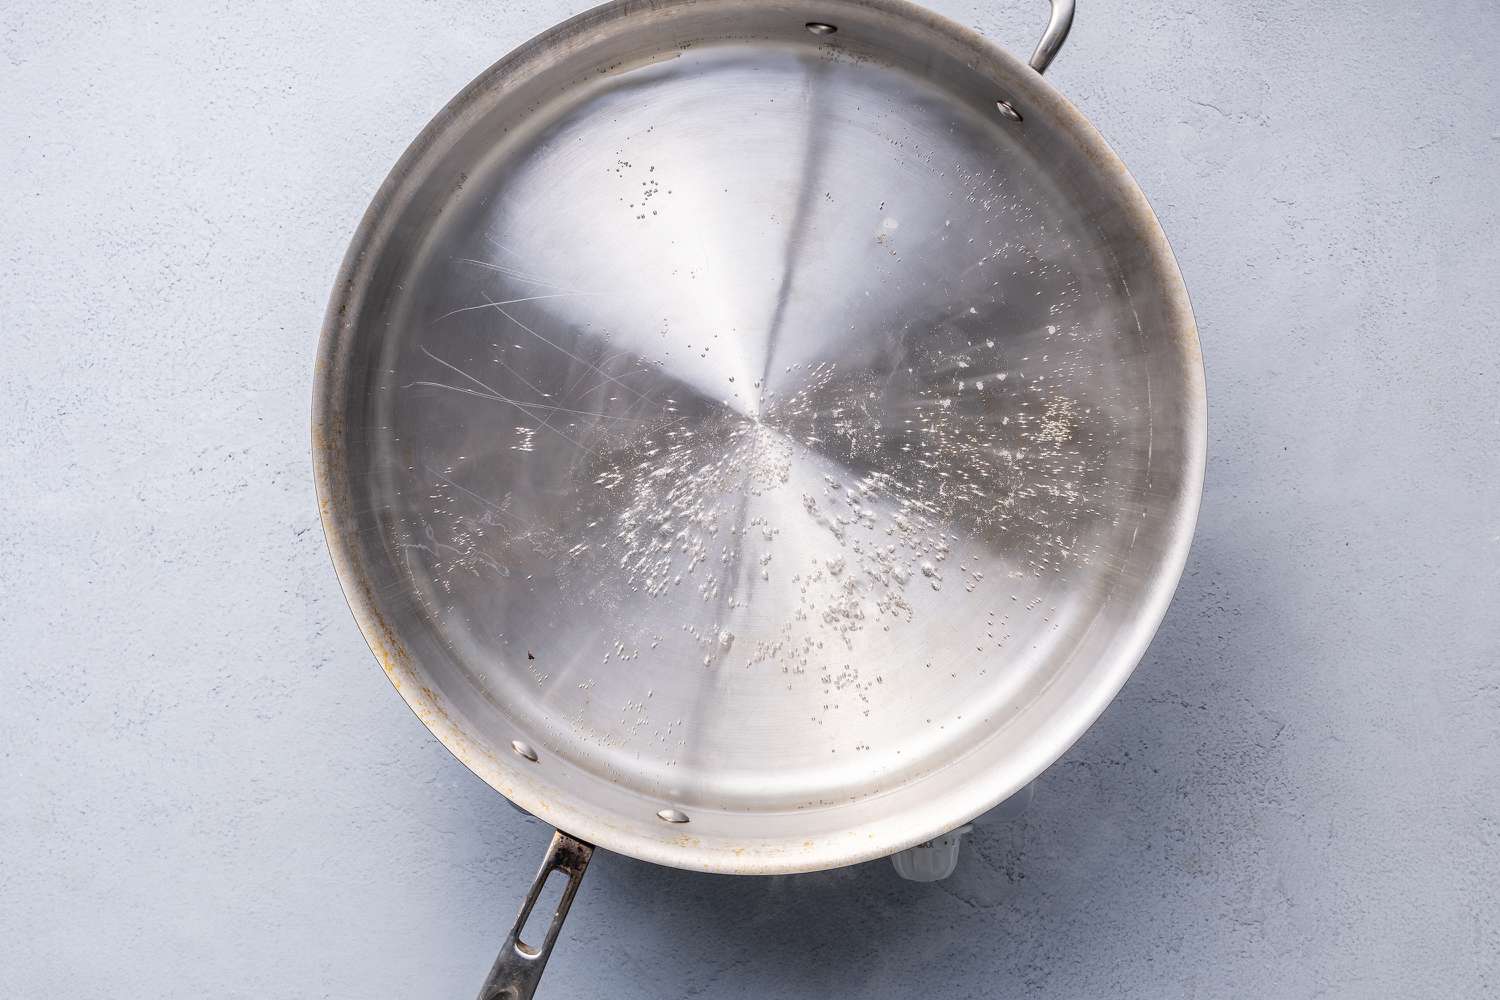 A large pan of boiling water